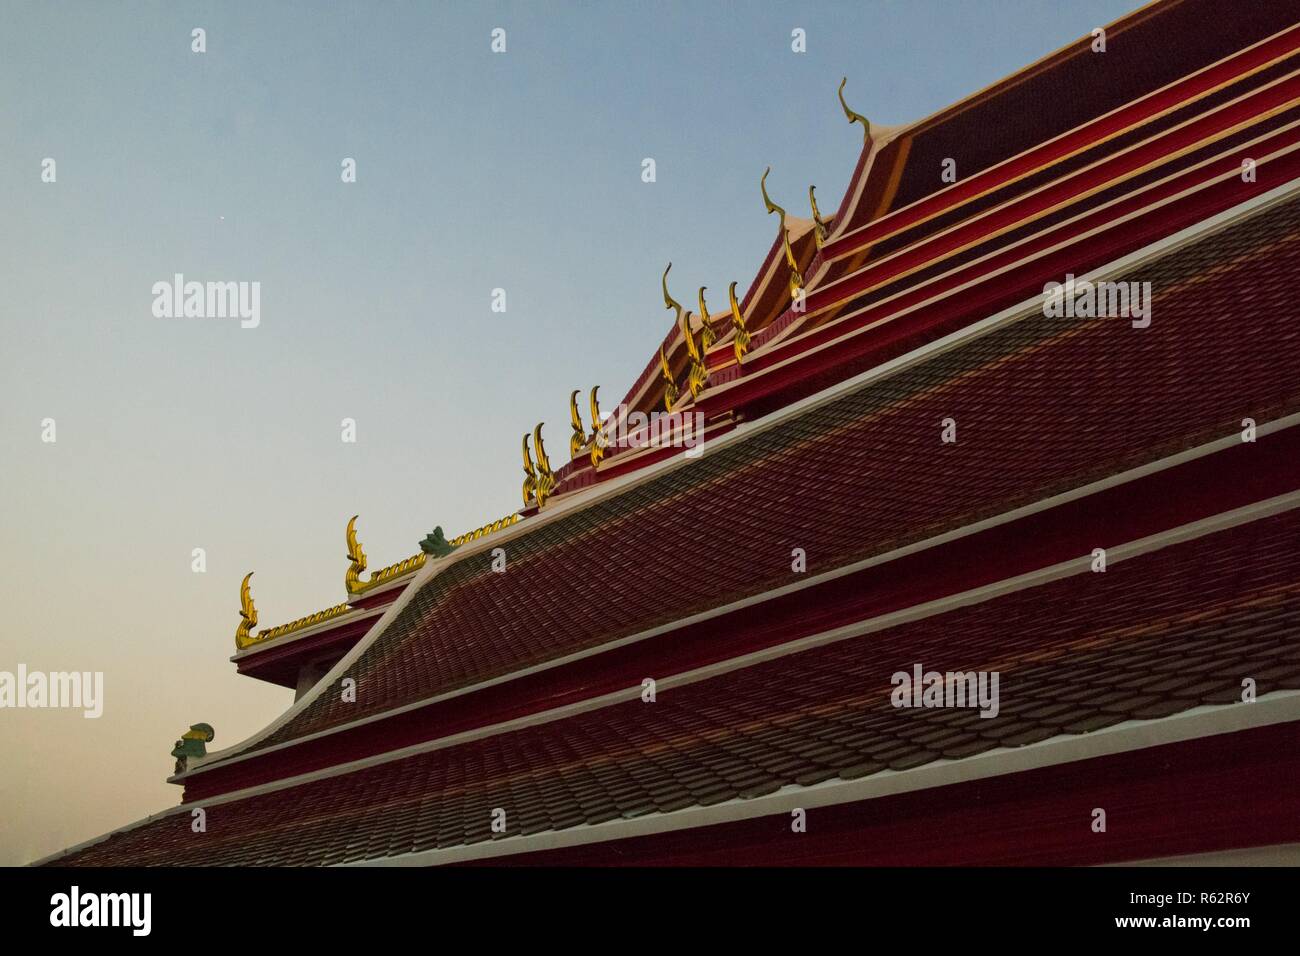 Lines on a rooftop in Asia with oriental decoration and negative space Stock Photo